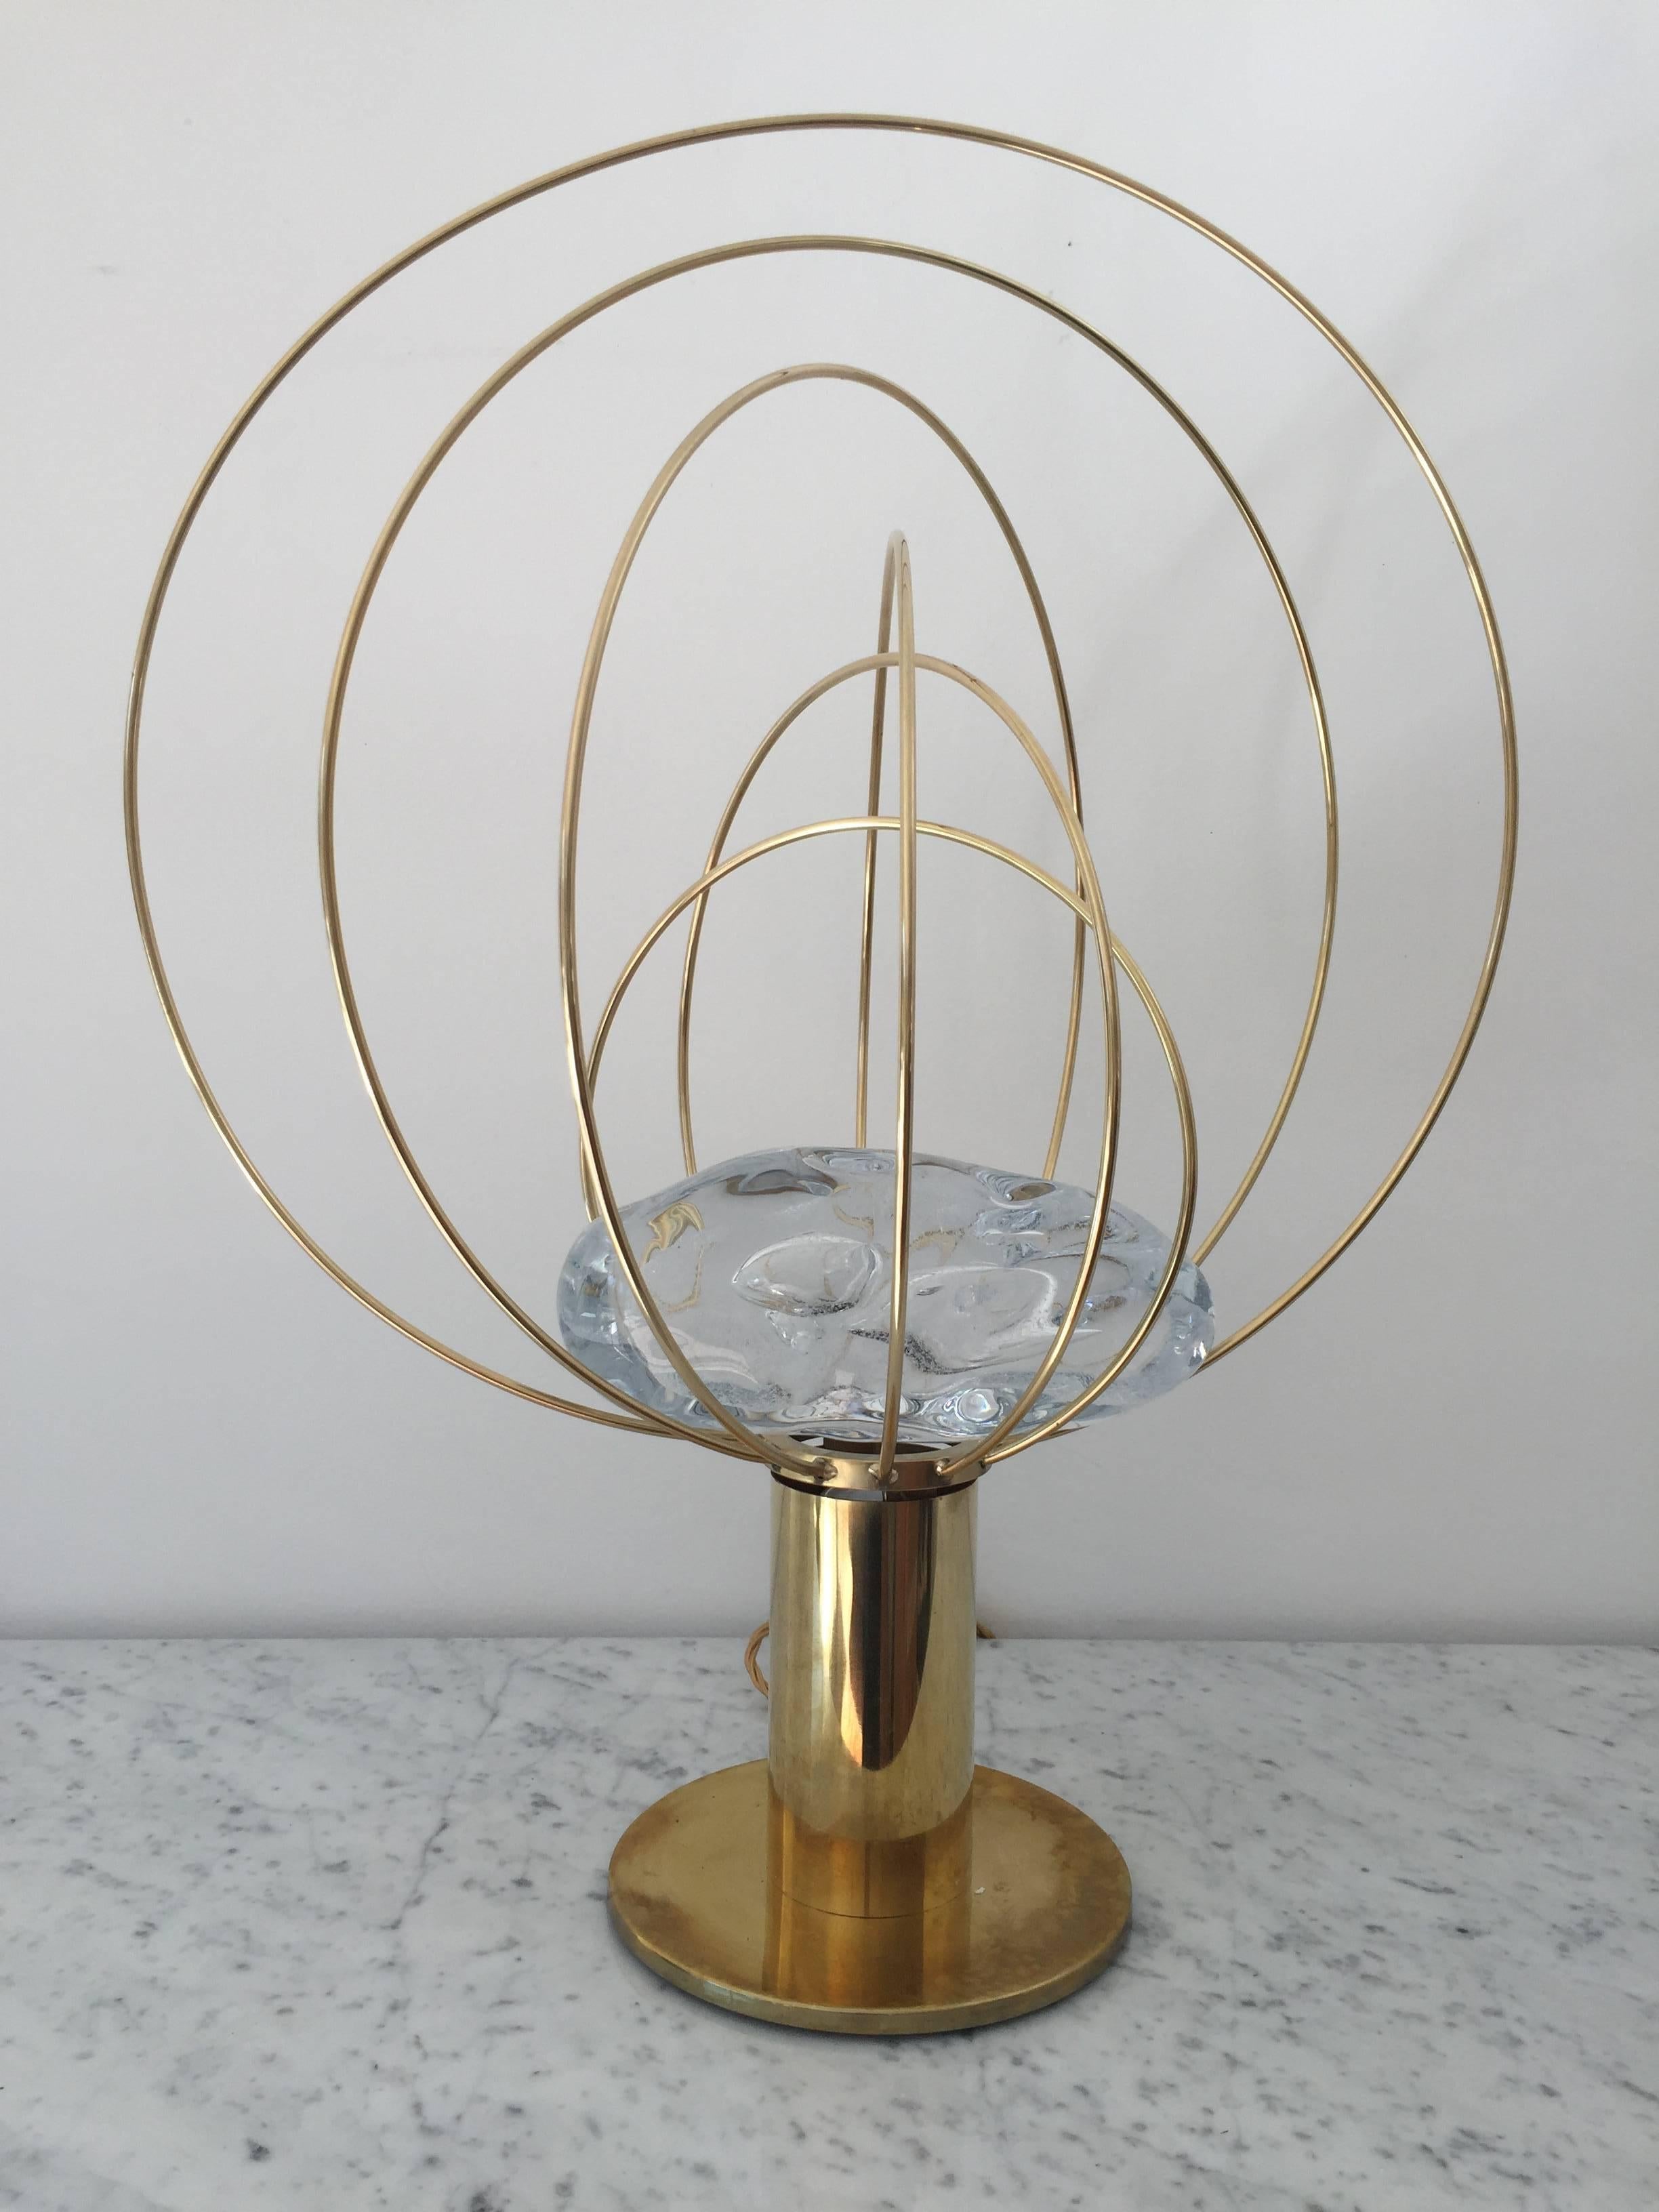 Sculptural pair of table lamps by Angelo Brotto;
Manufactured by Esperia, Italy, circa 1970;
Brass glass.